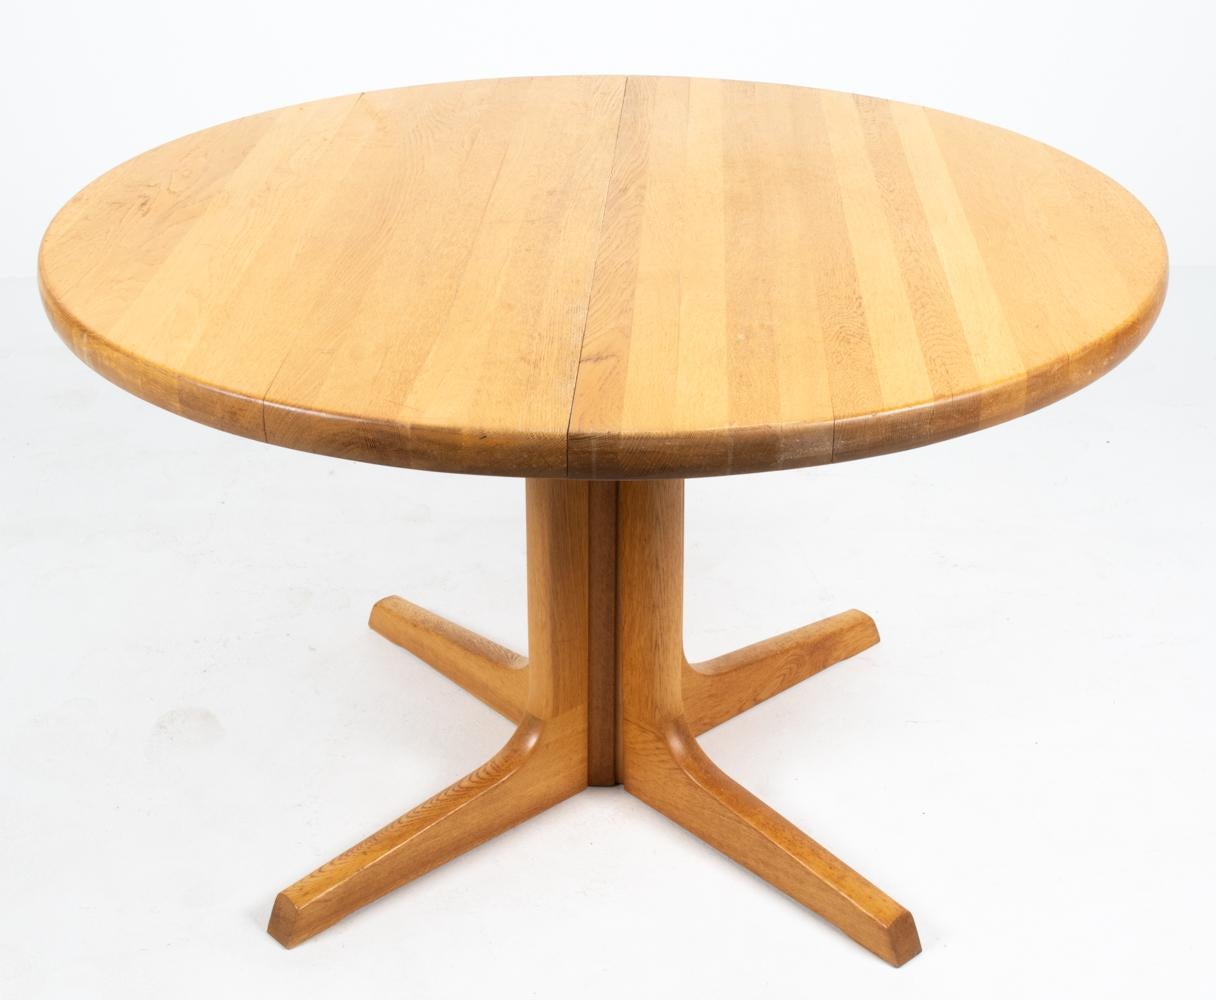 Oak Mid-Century Modern Extendable Dining Room Table by Niels Otto Møller, 1970s For Sale 1